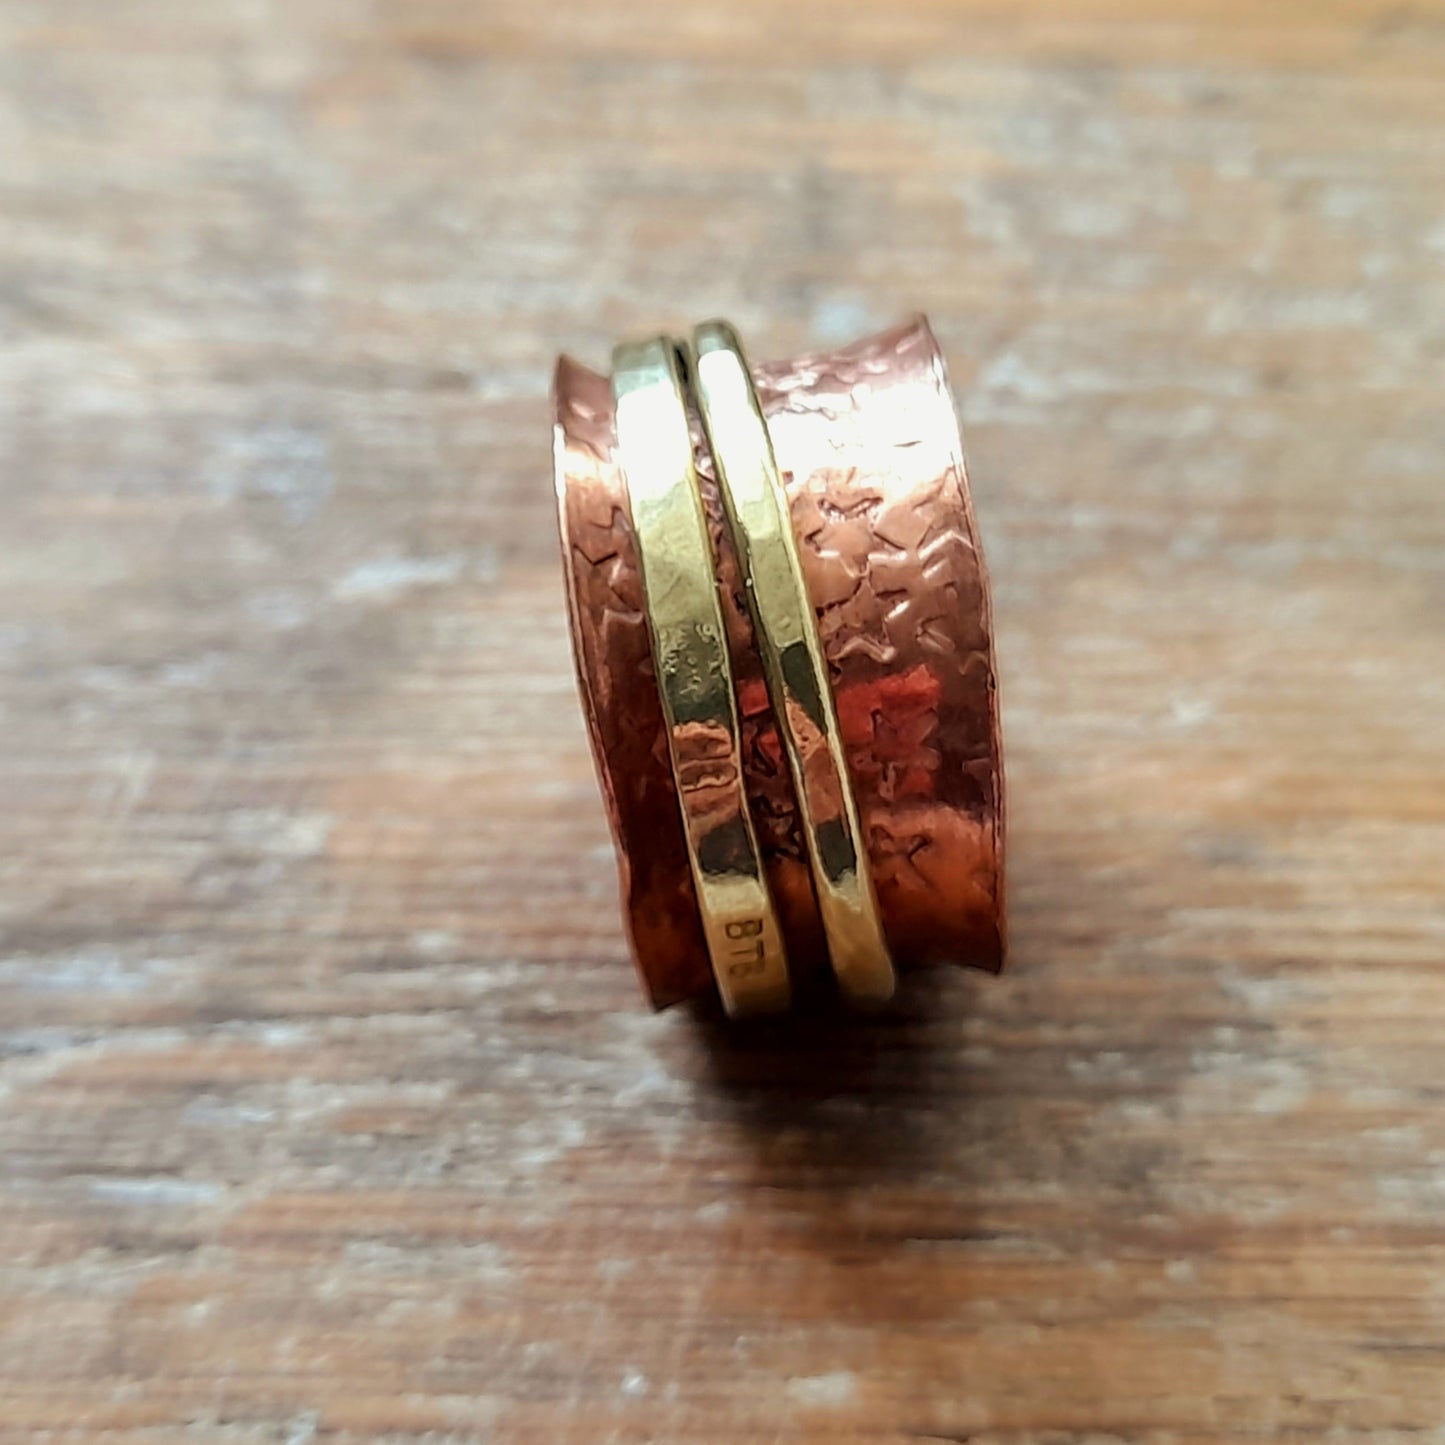 Copper and Mixed Metal Spinner Rings. Spinner Rings For Anxiety. Unisex Spinning Rings For Meditation